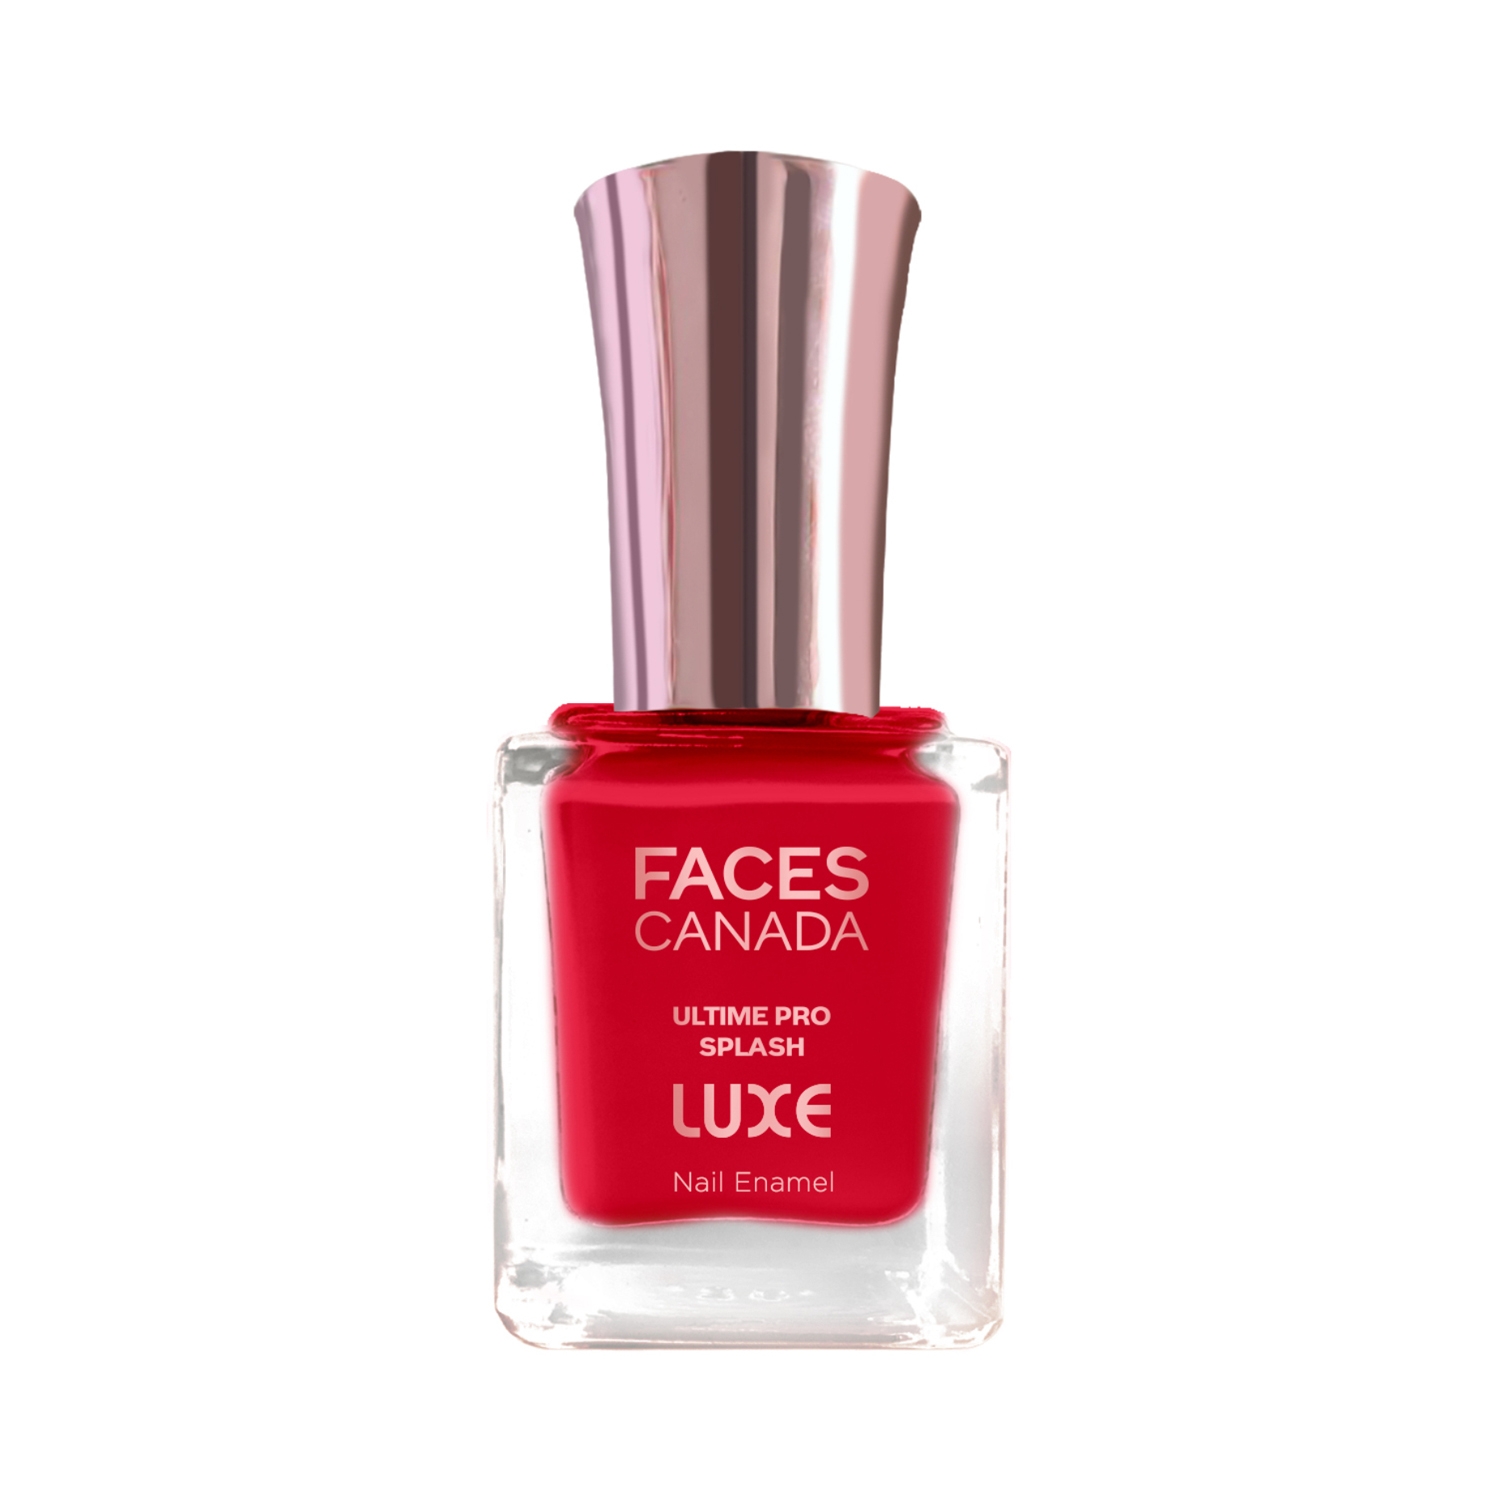 Faces Canada | Faces Canada Ultime Pro Splash Luxe Nail Enamel - L21 Getting Bolder (12ml)